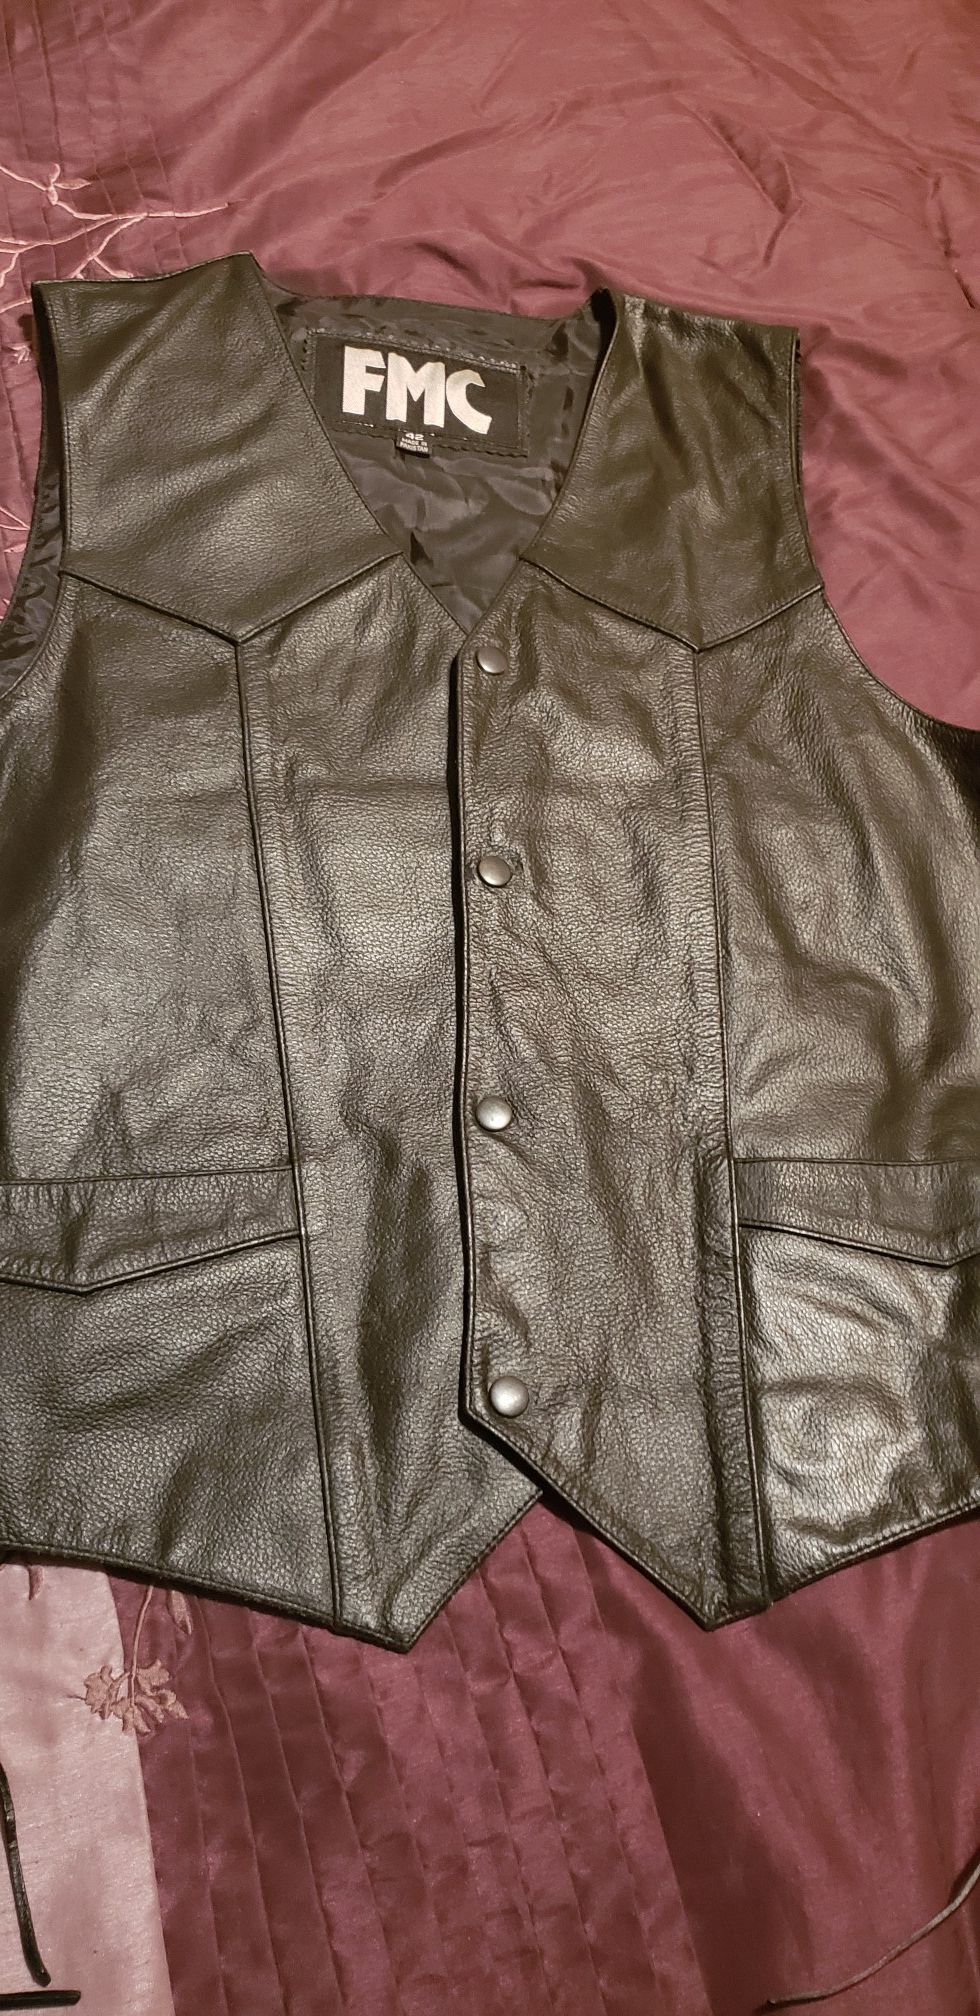 Leather Guys Vest In good shape..